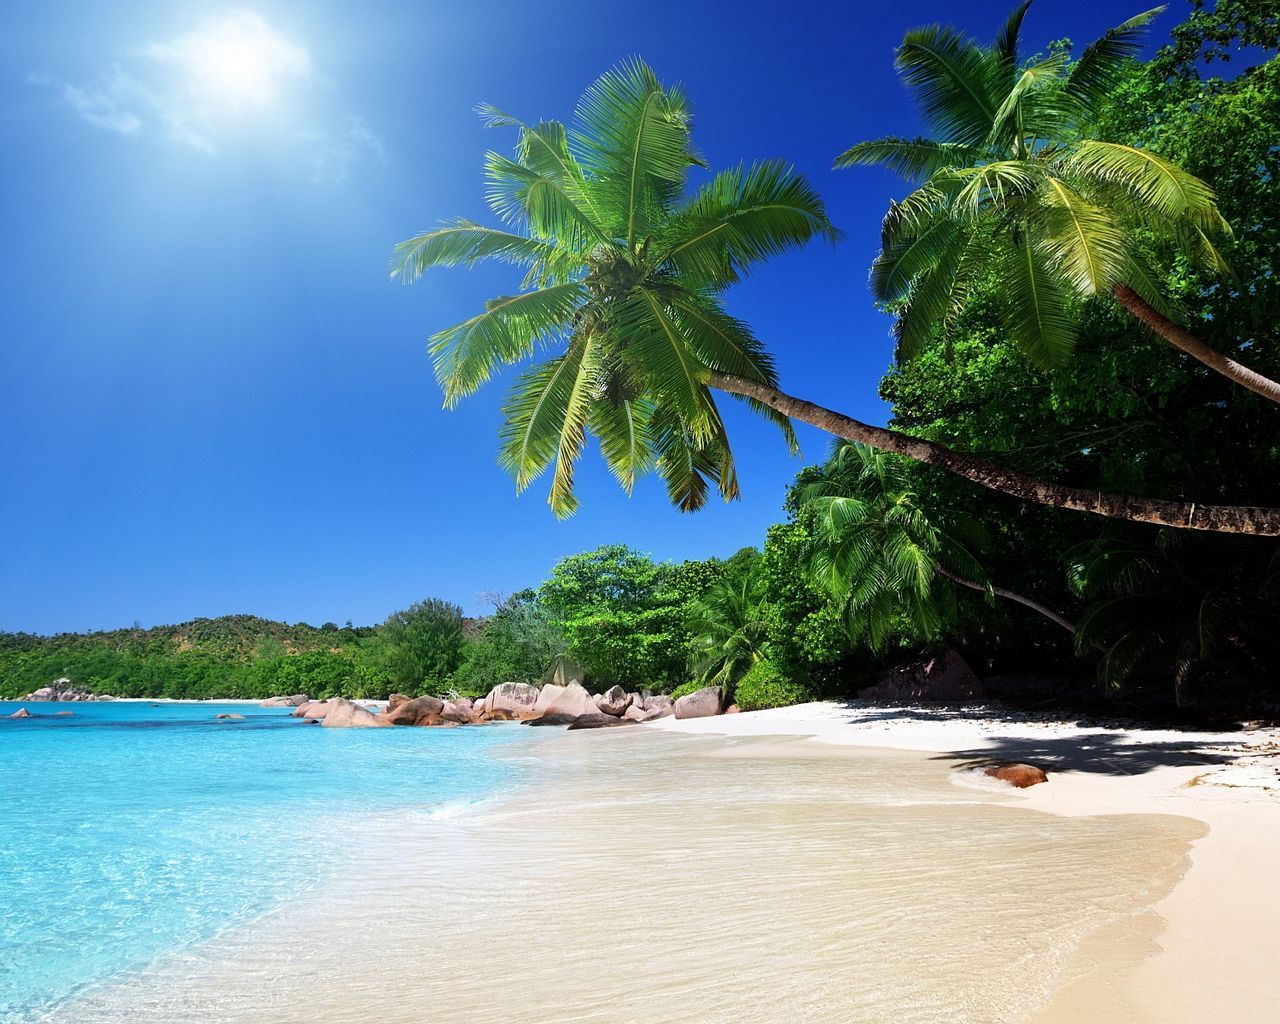 Download wallpapers 1280x1024 beach, sand, palm trees, tropical.